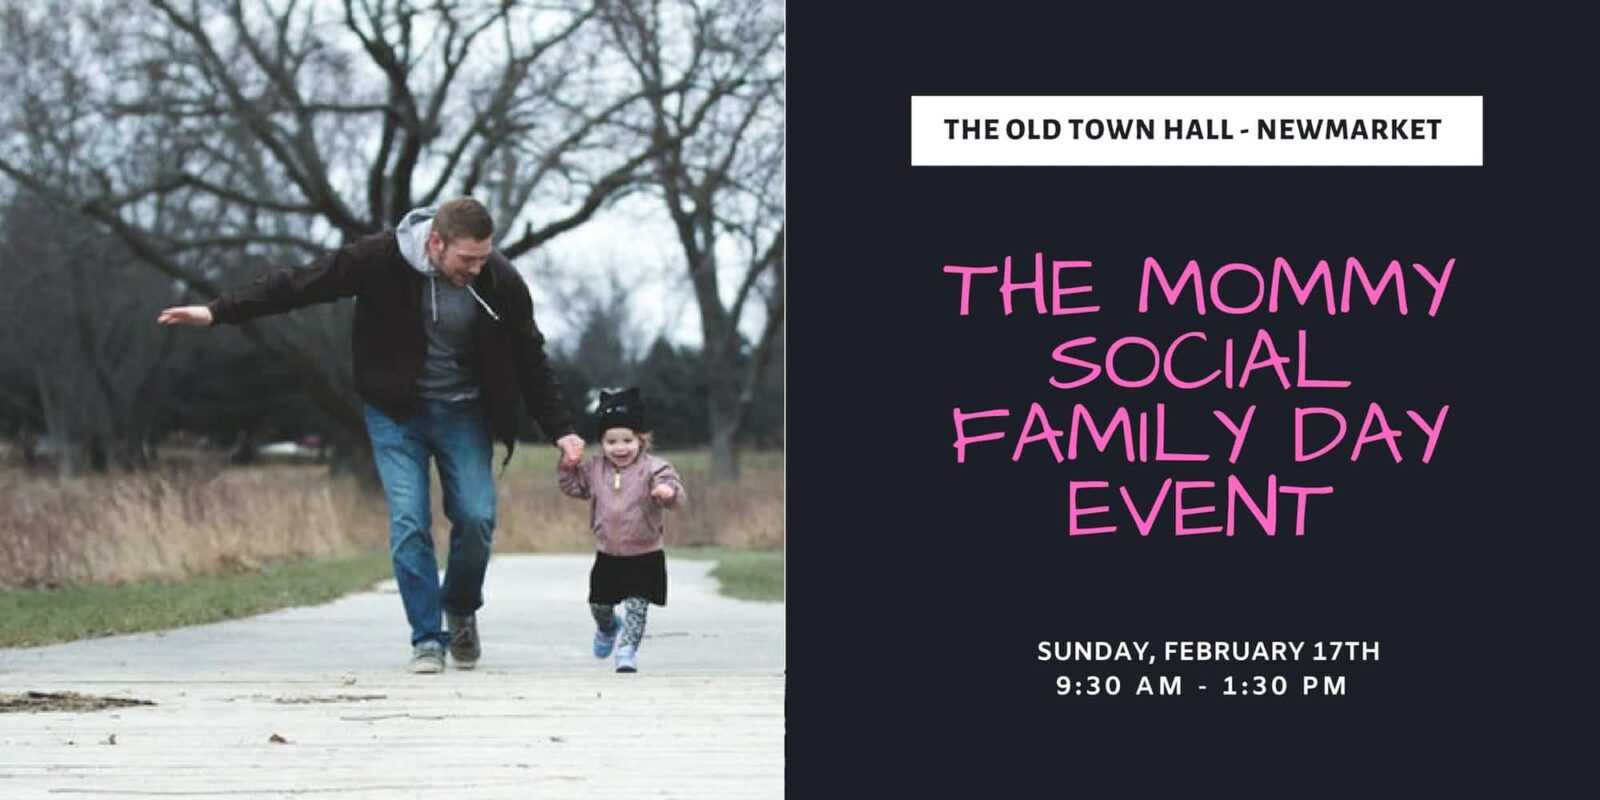 What To Do On Family Day 2019 In Toronto